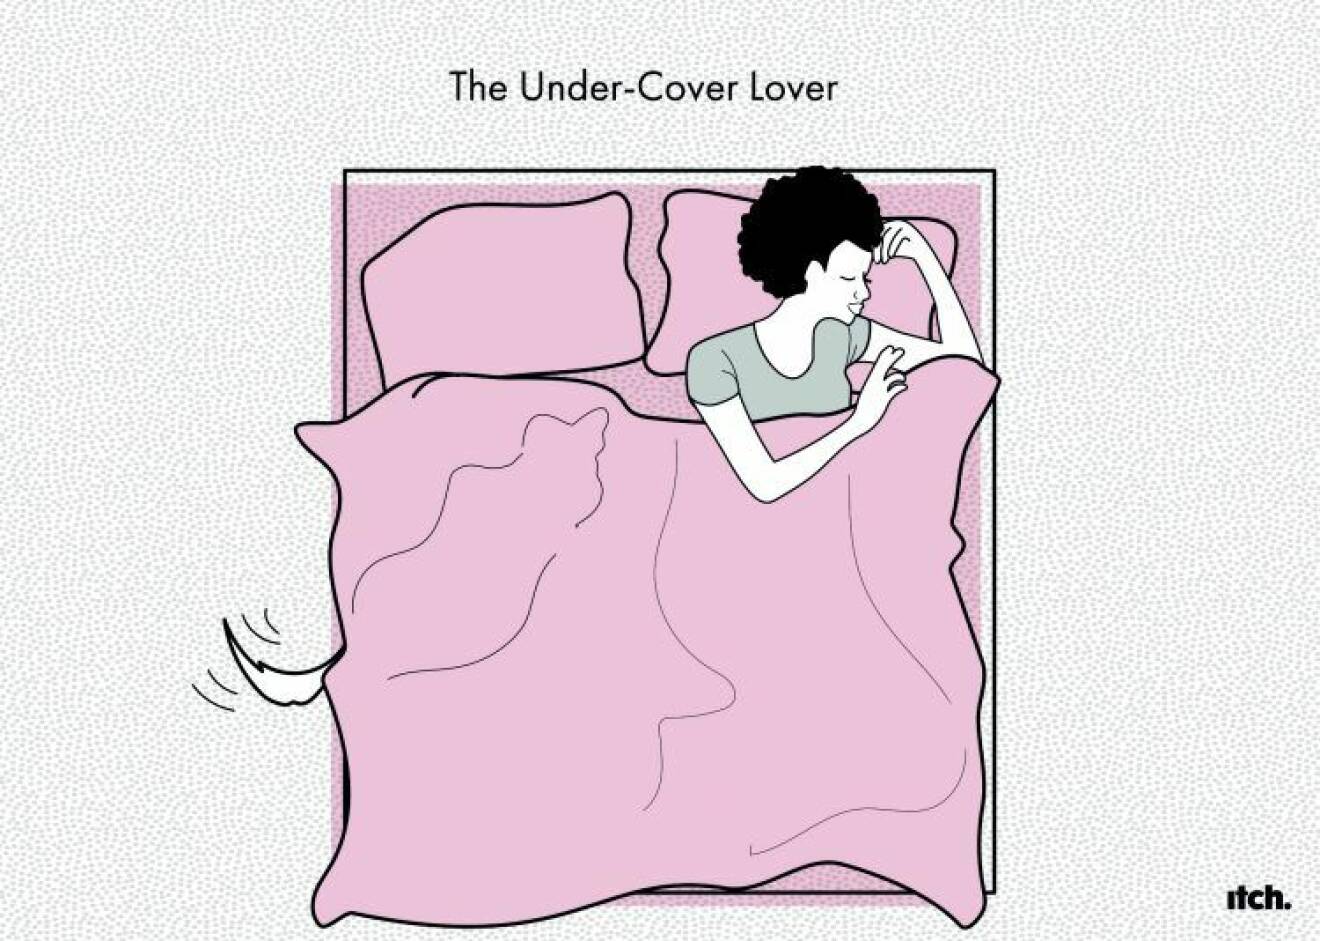 The Under-Cover Lover